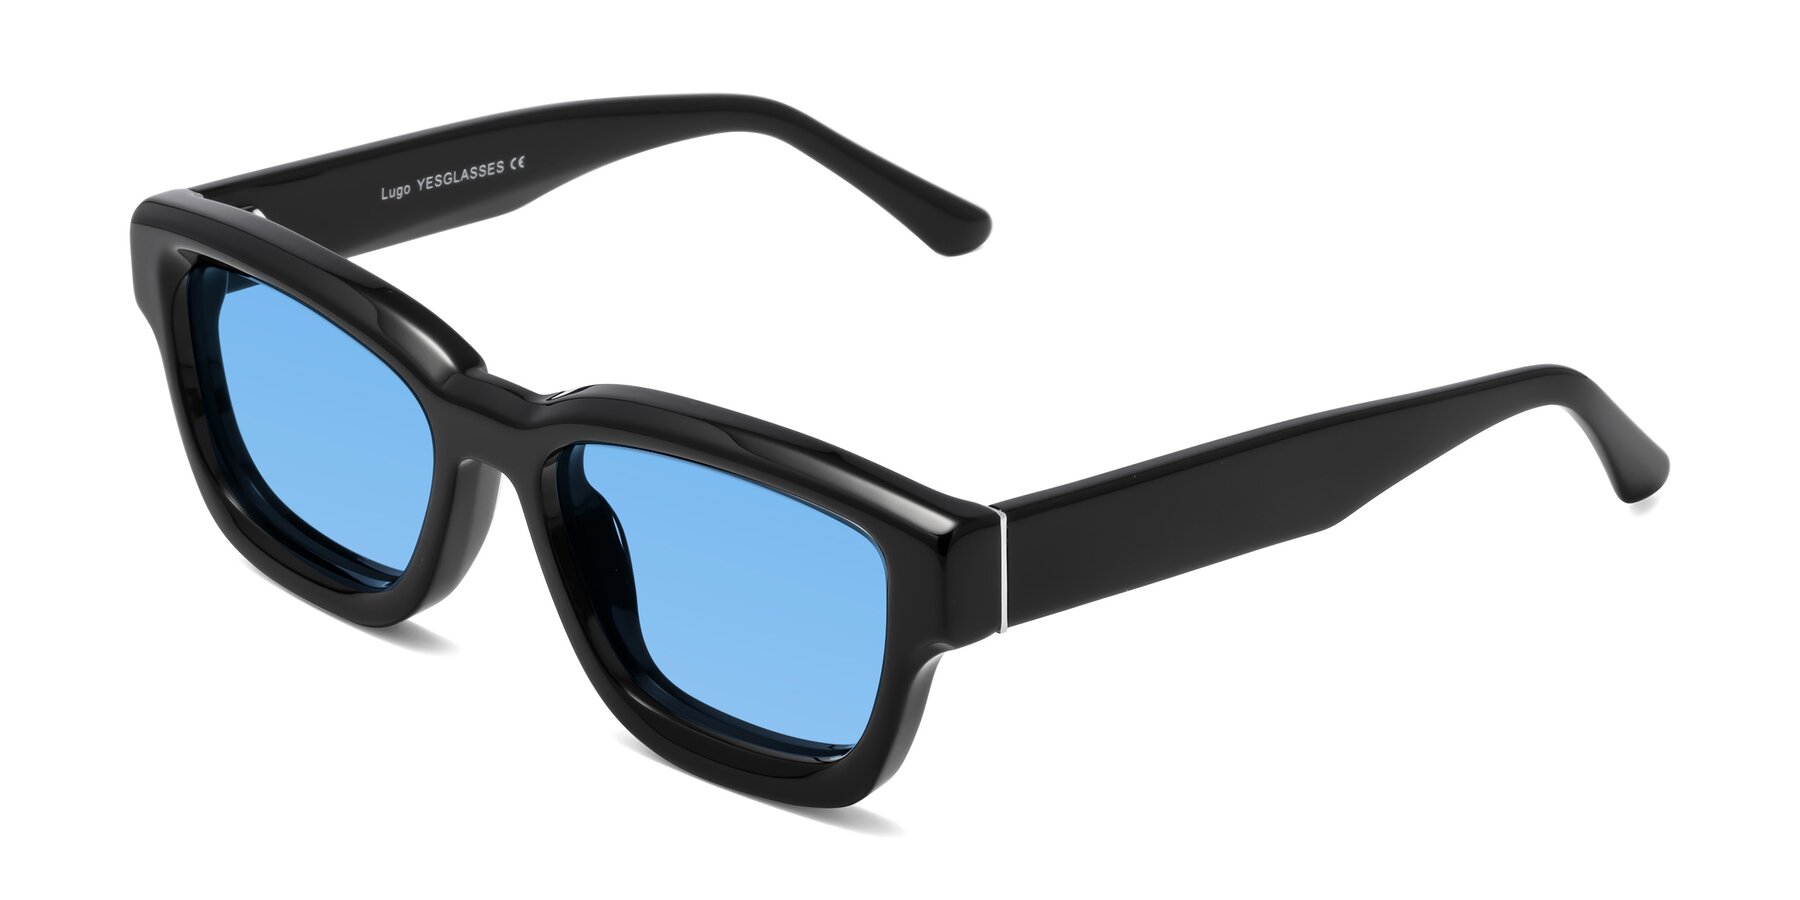 Angle of Lugo in Black with Medium Blue Tinted Lenses